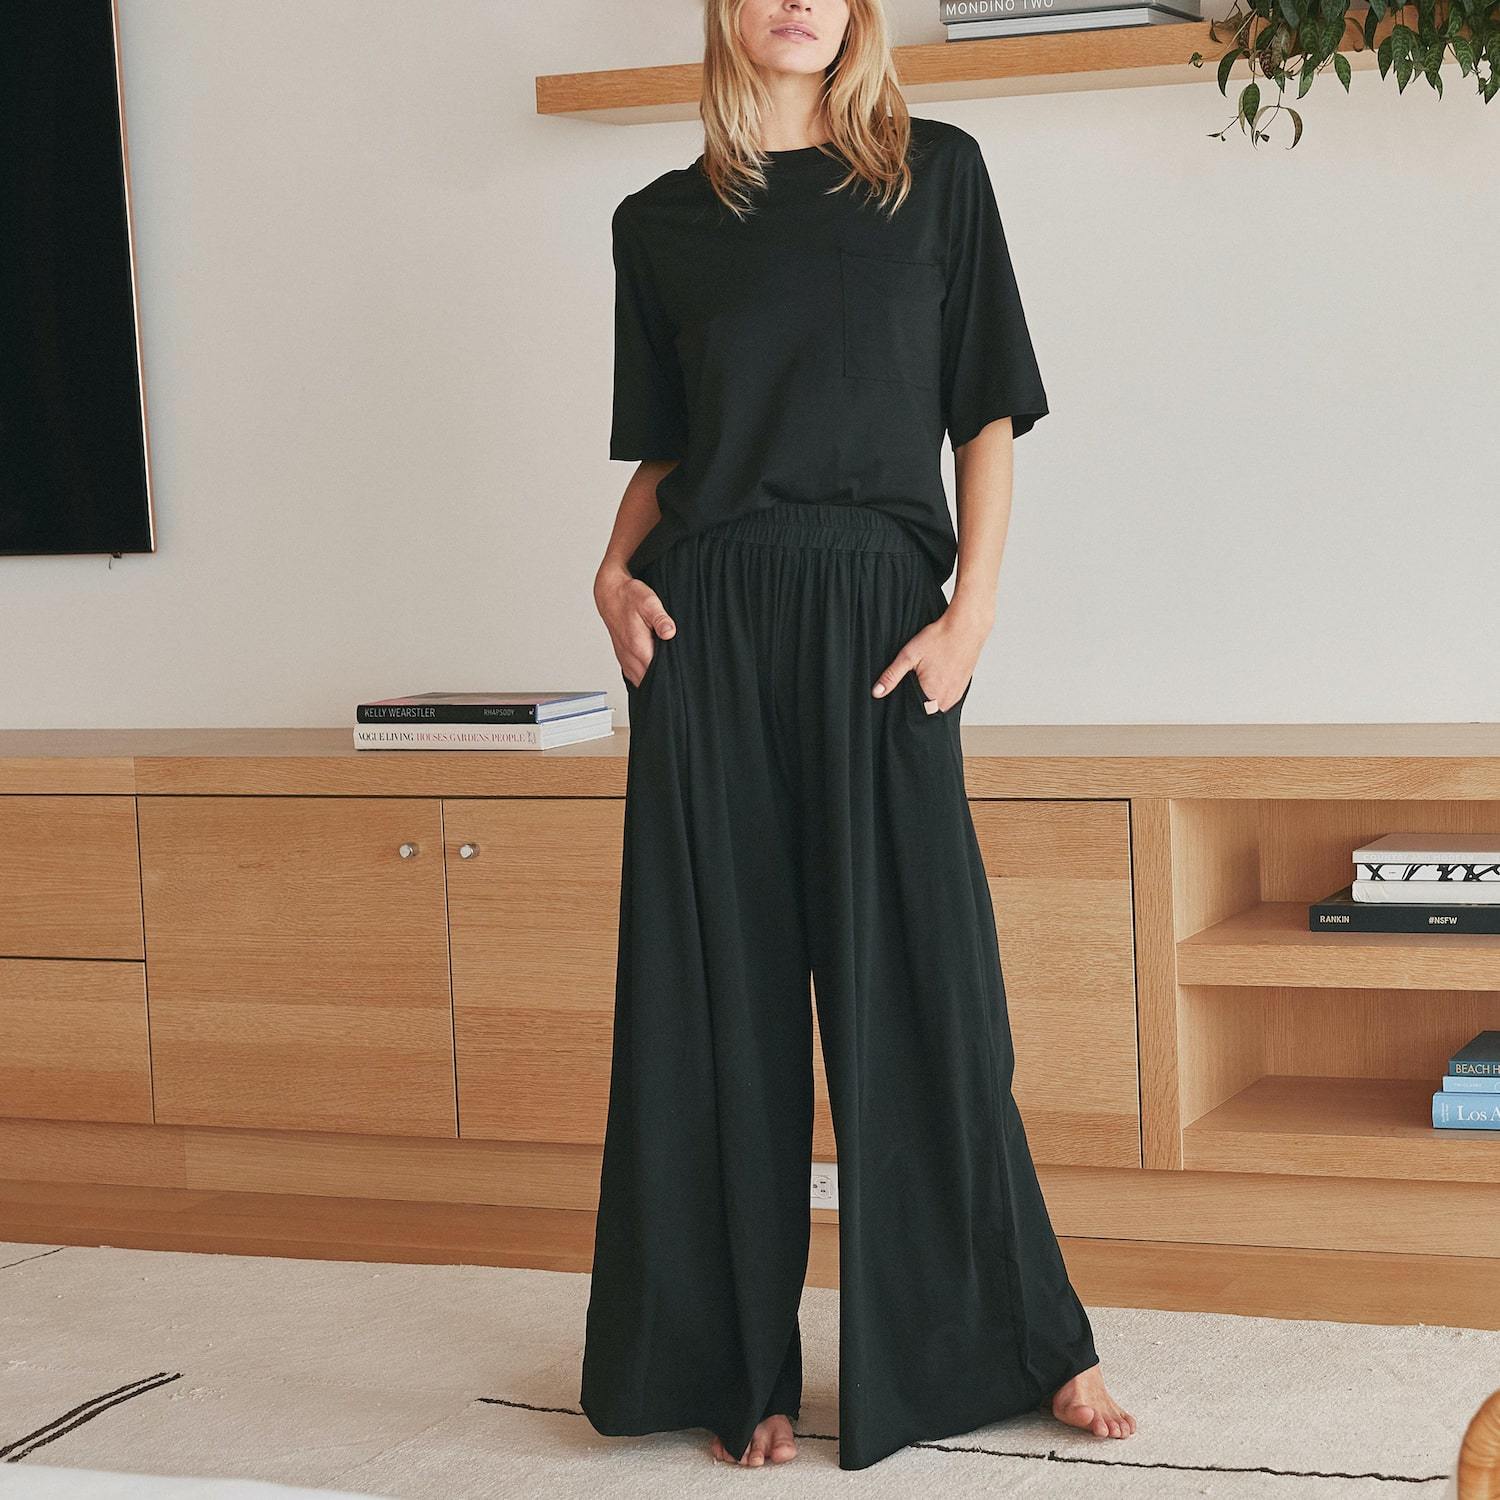 7 of Our Favorite Pairs of Lunya Pajamas That Are Good in Bed… and Elsewhere